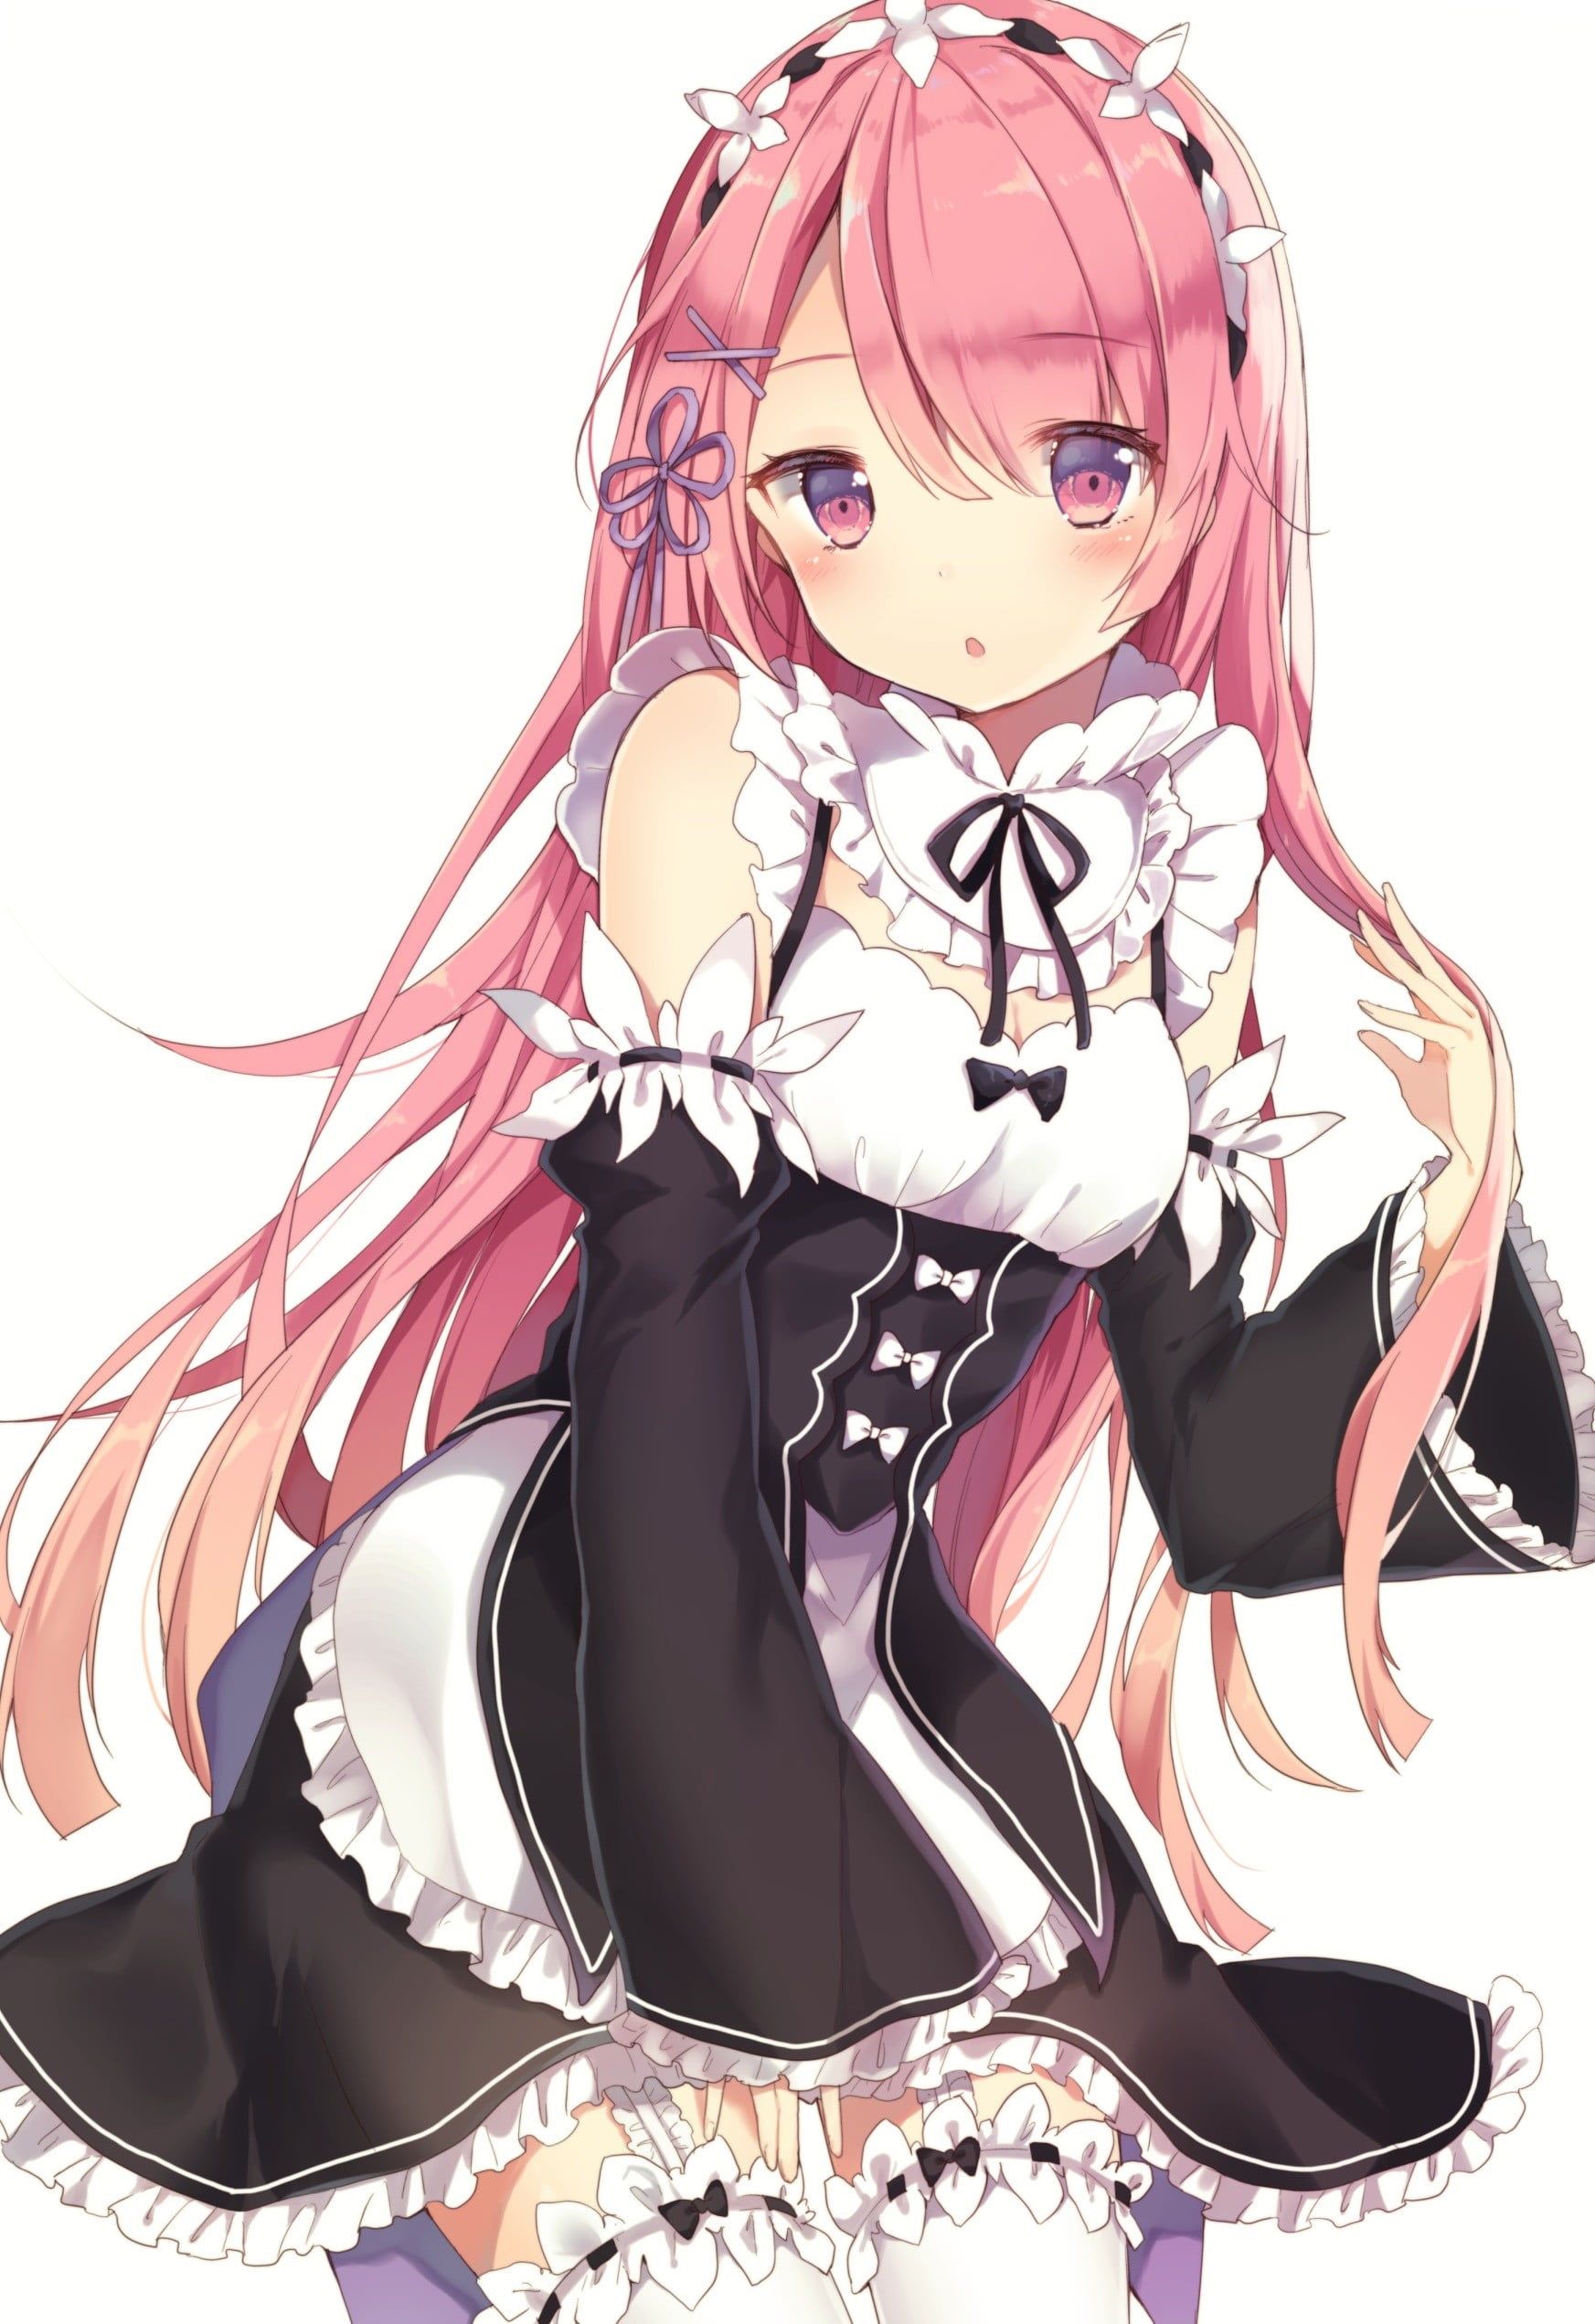 Anime Girl Wearing A Maid Outfit